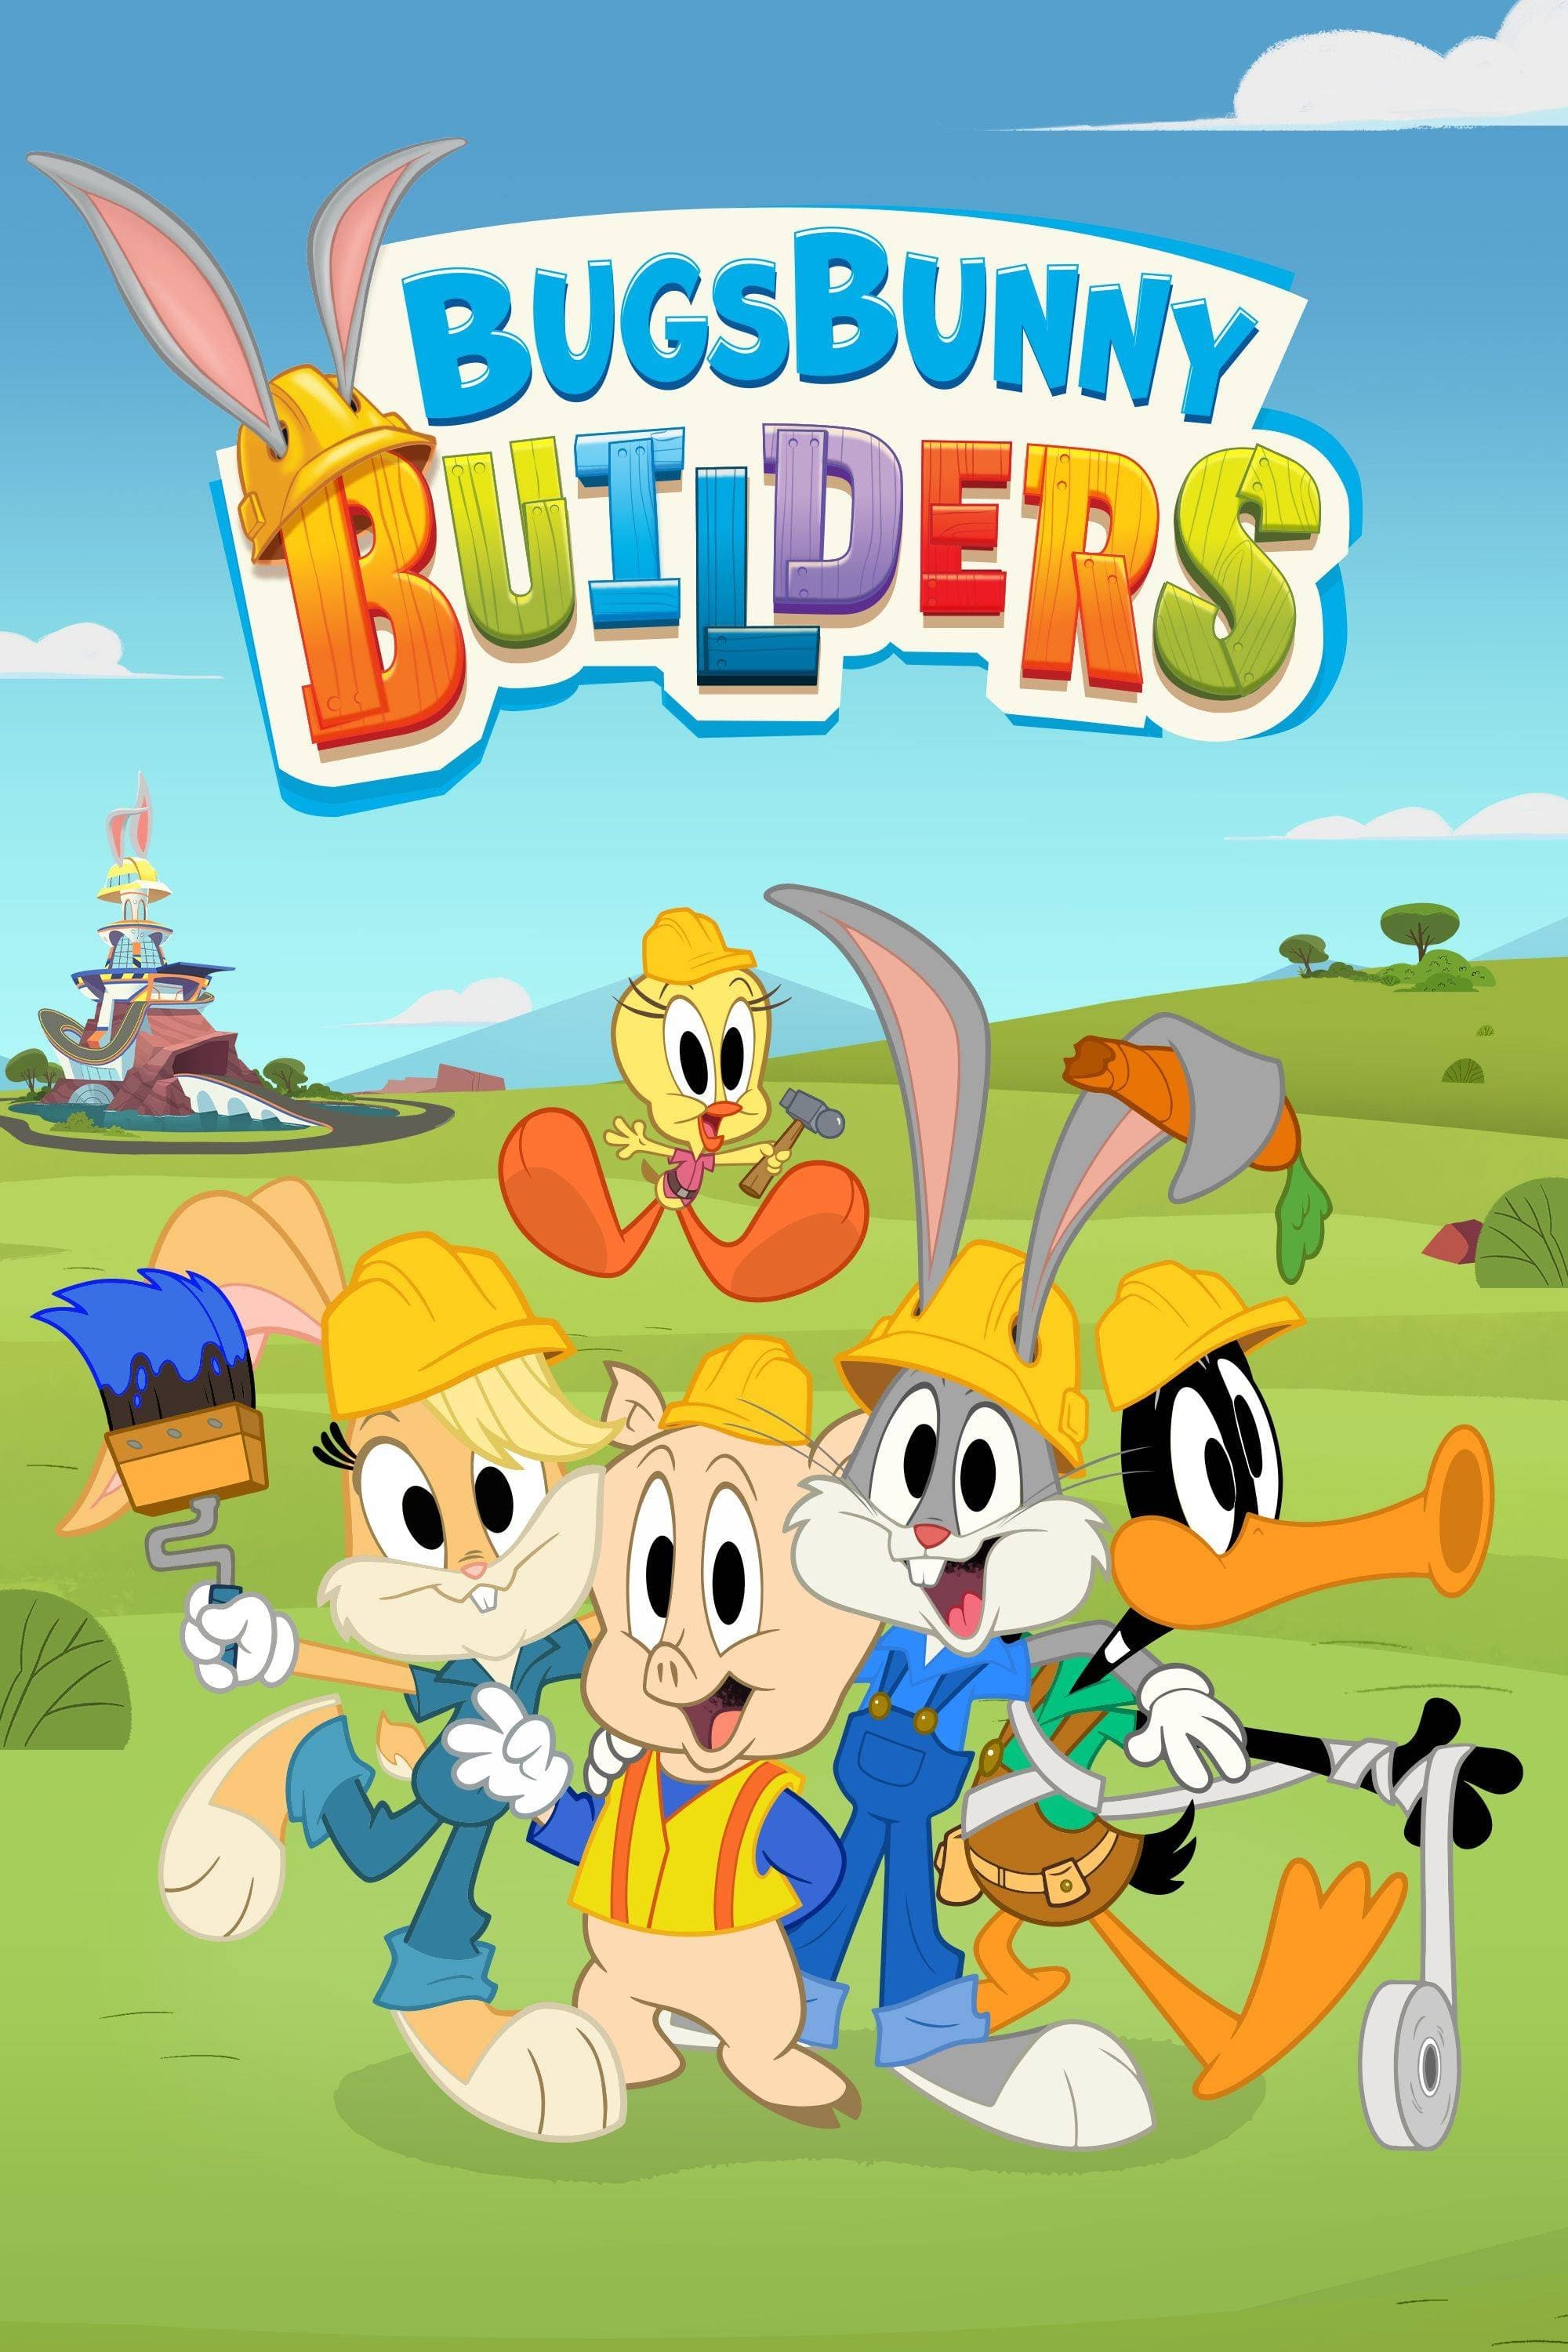 Bugs Bunny Builders TV Shows About Educational